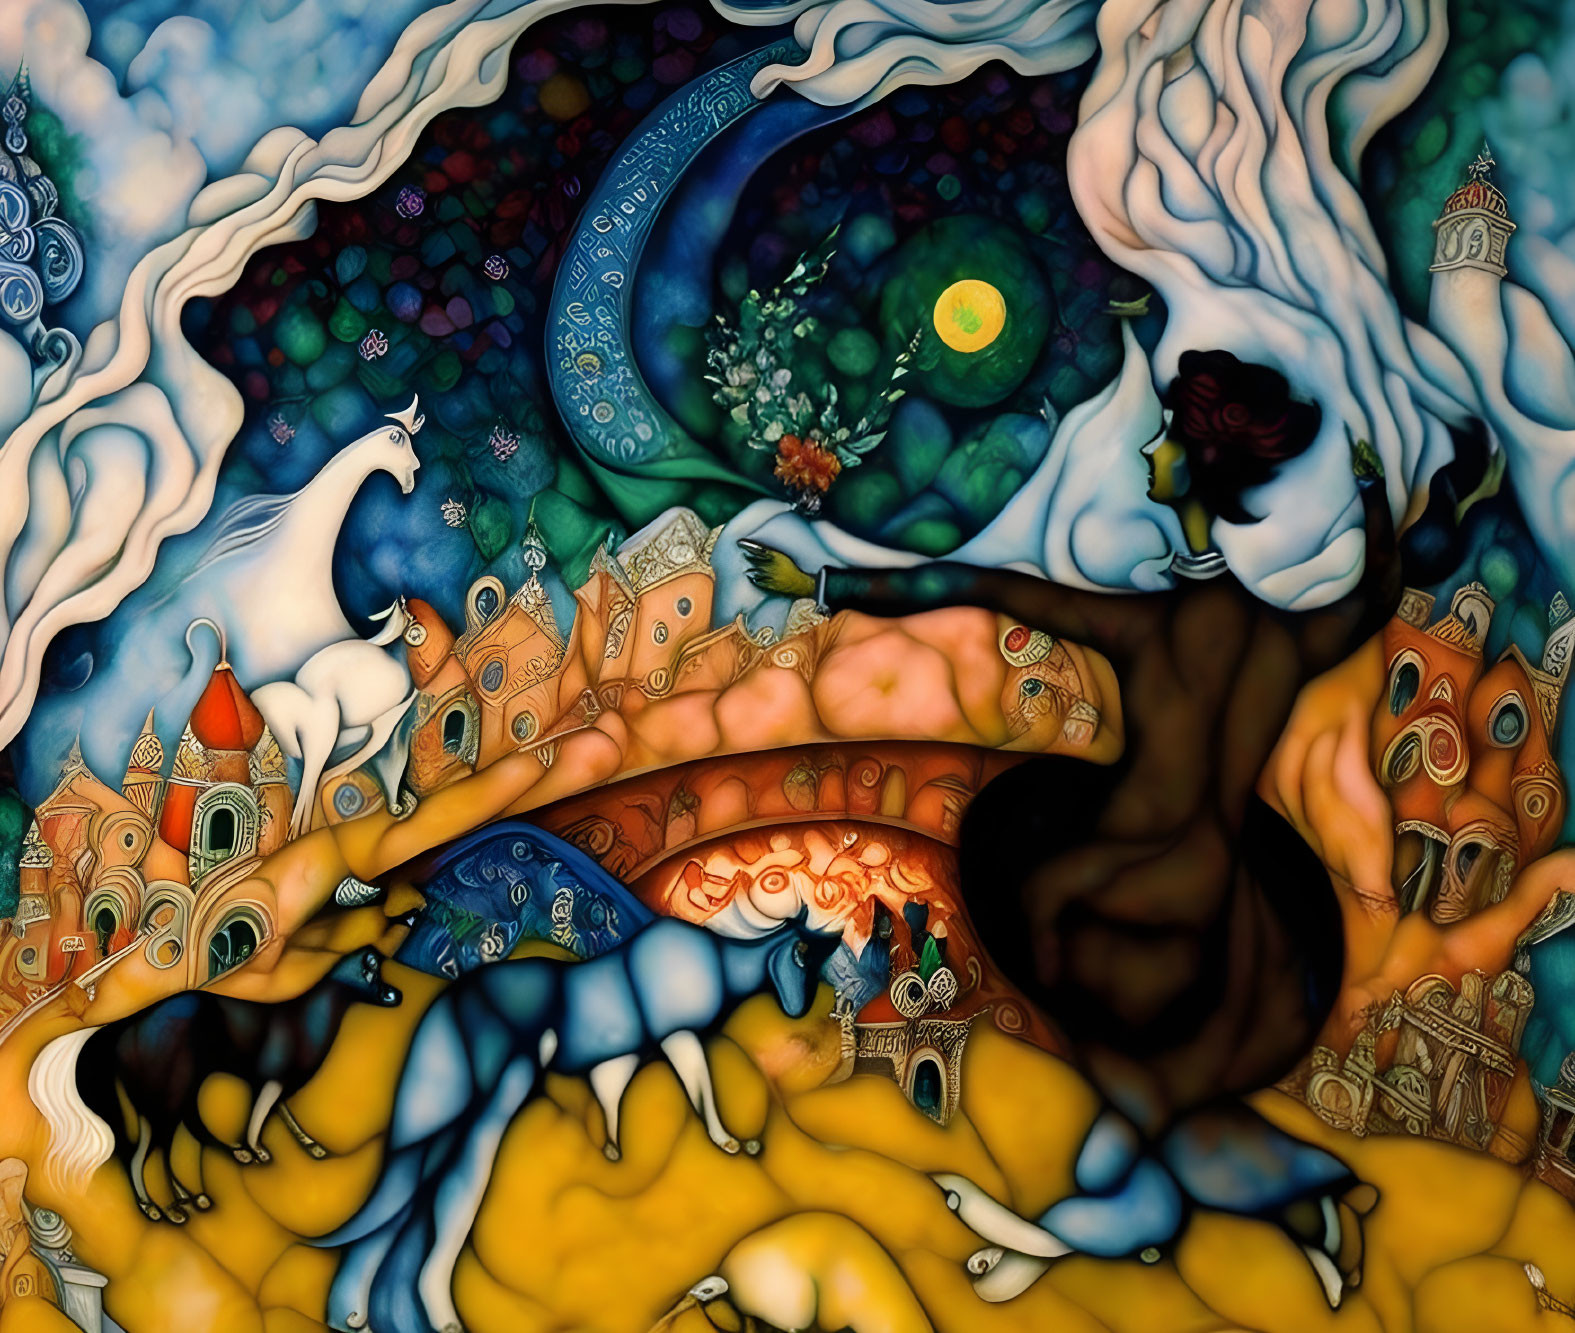 Colorful painting with woman silhouette, cats, moonlit sky, clouds, and whimsical buildings.